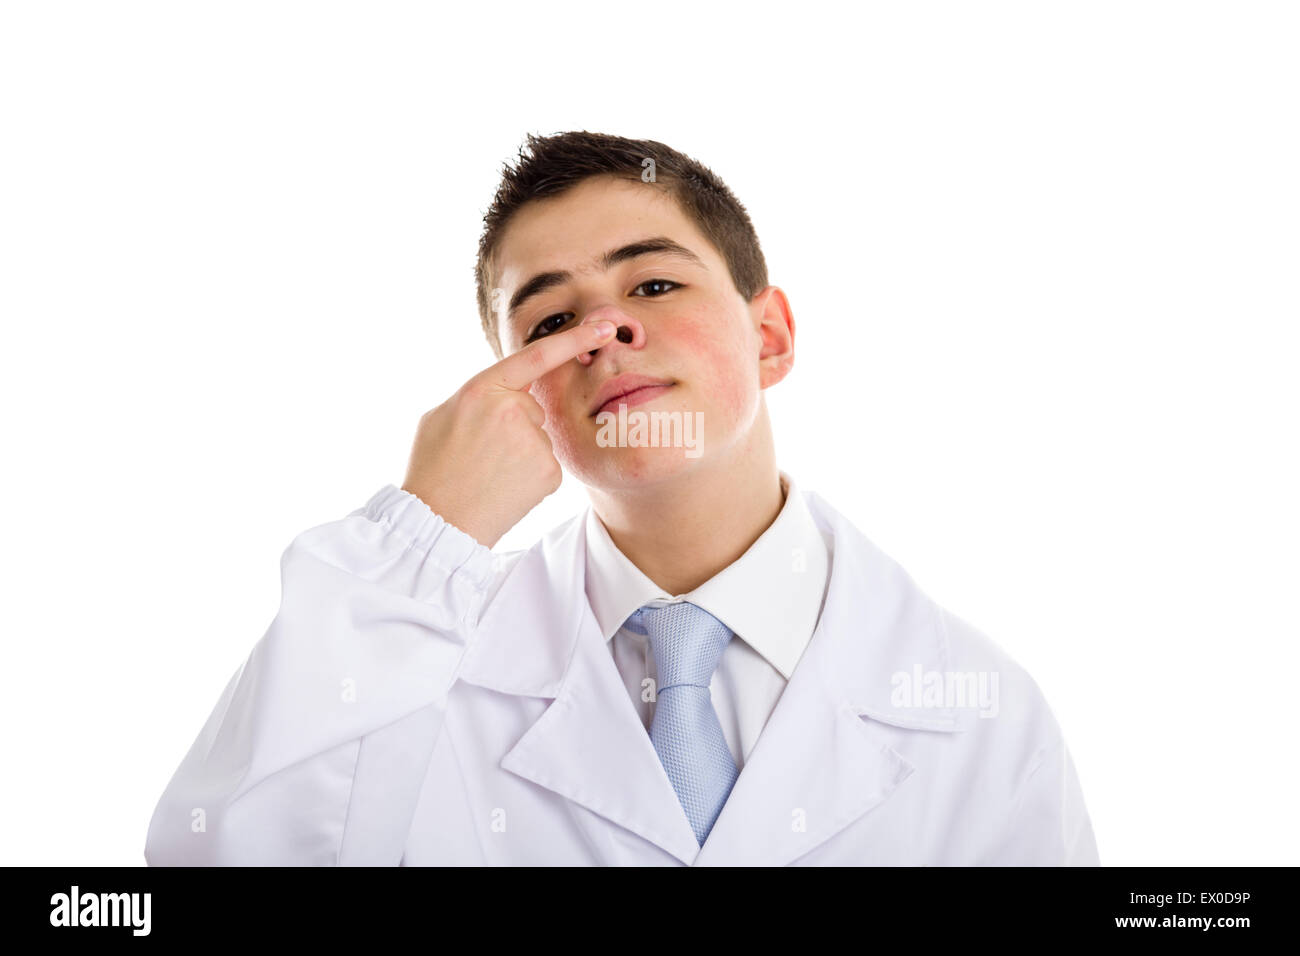 child dressed as a doctor in light blue tie and white coat helps to feel medicine more friendly: he is touching and pushing up his nose. His acne skin has not ben retouched Stock Photo